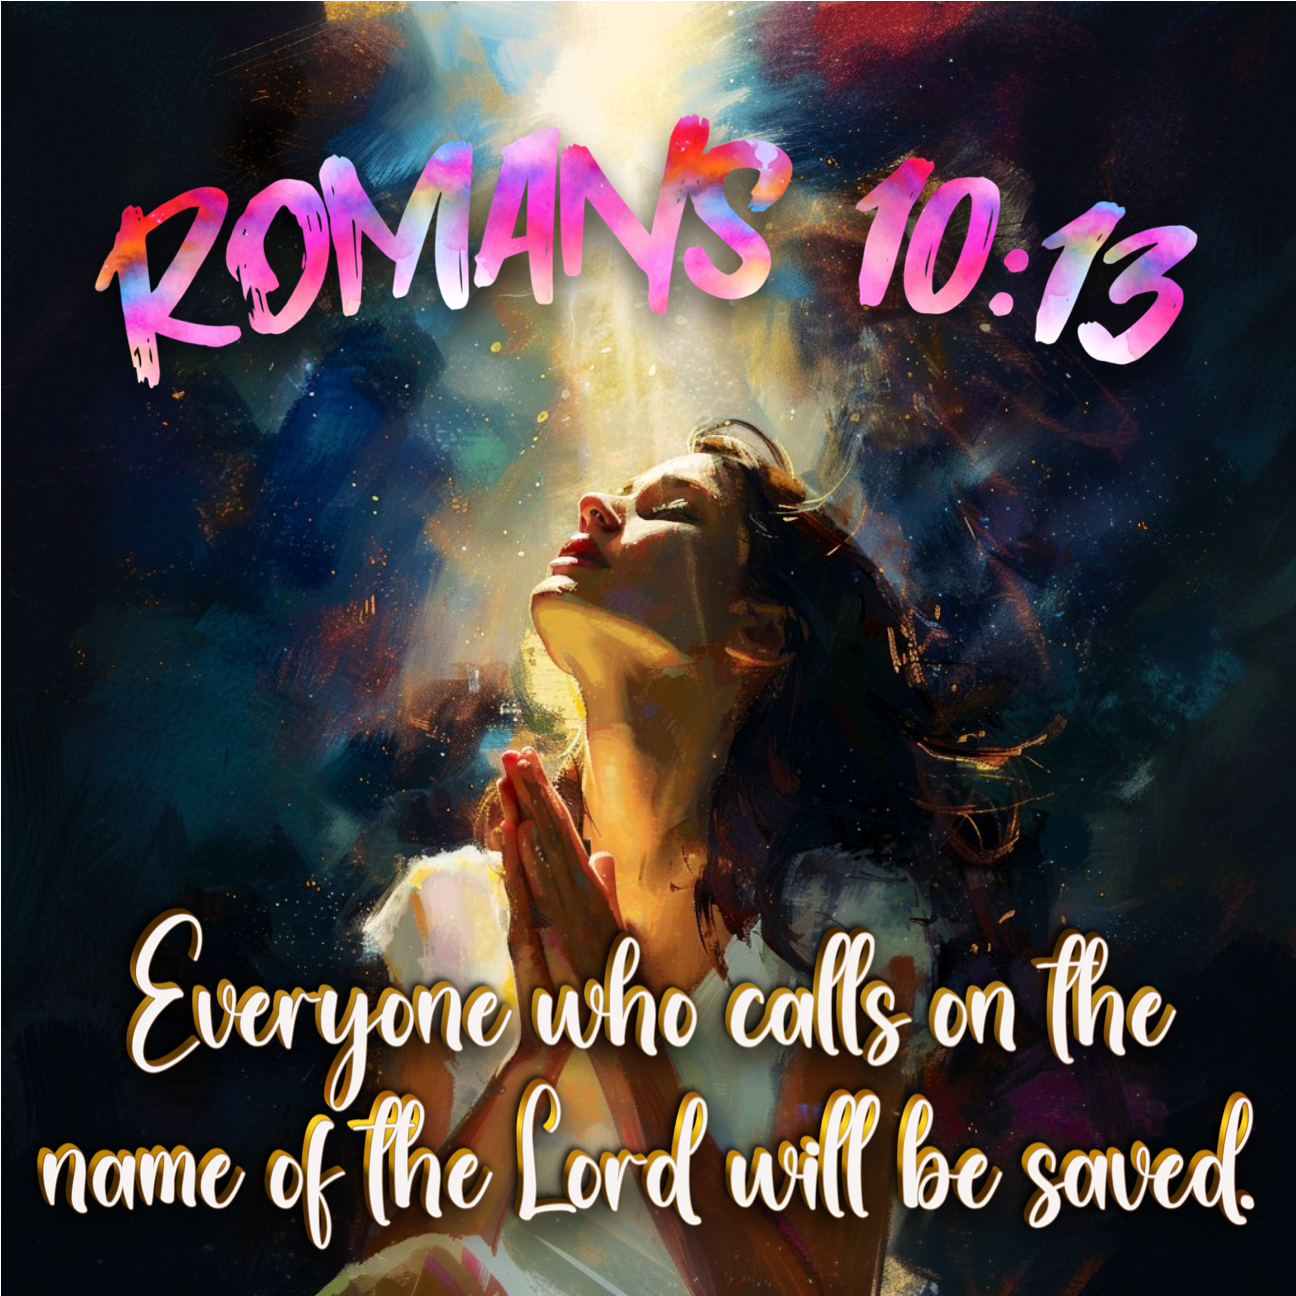 Romans 10:13 Bible Verse - Everyone Who Calls on the Lord Will Be Saved